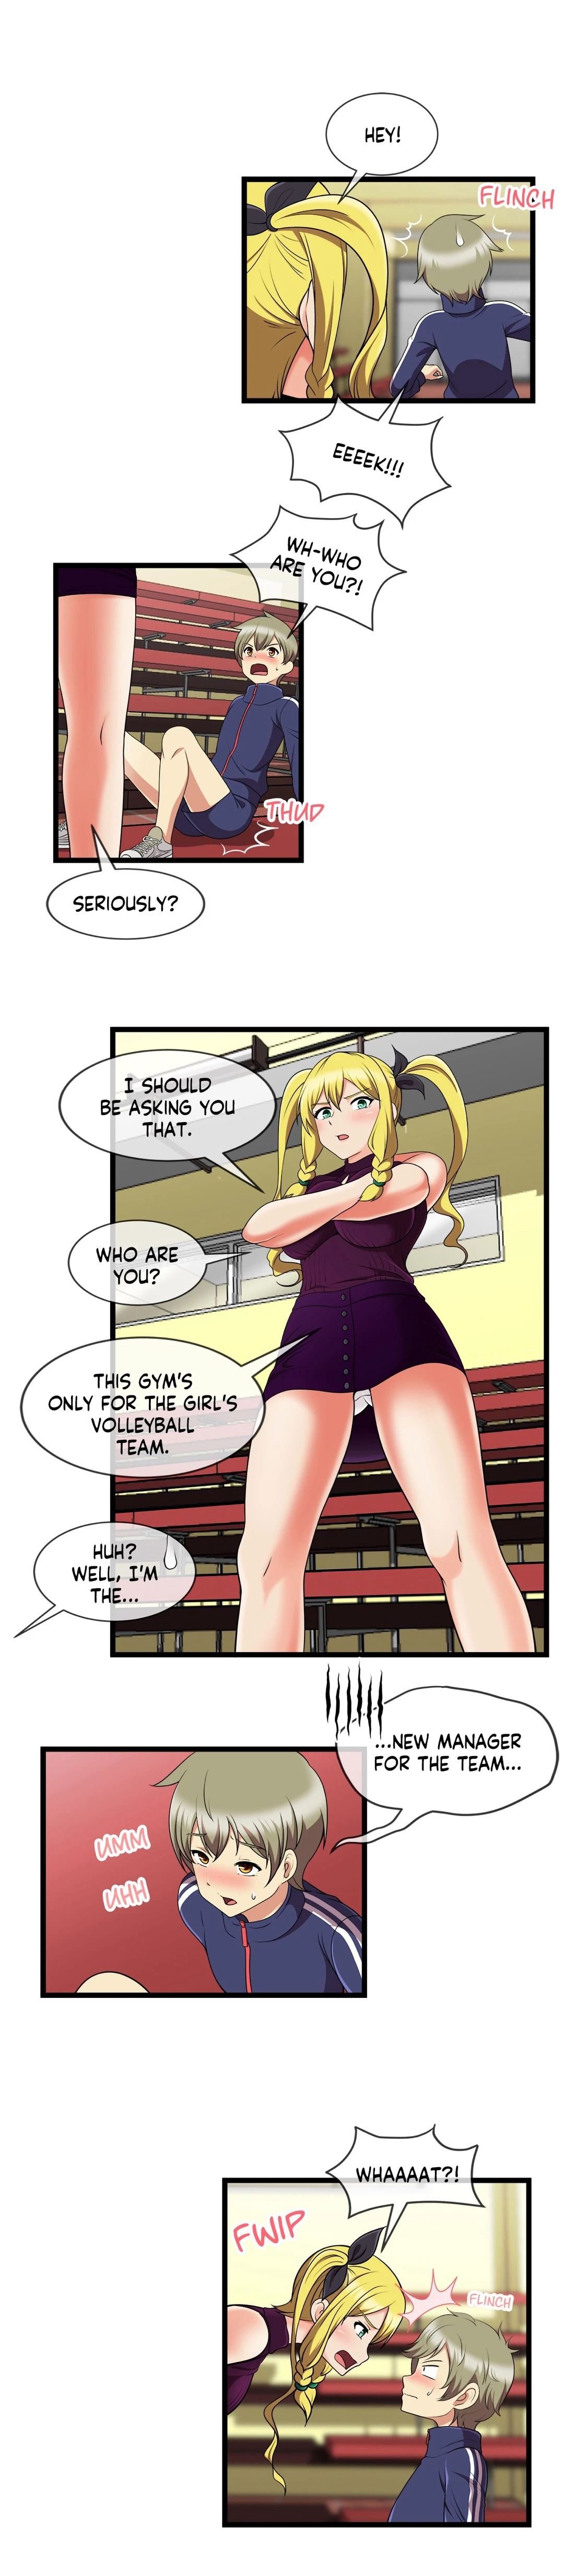 the-naughty-volleyball-team-chap-12-5